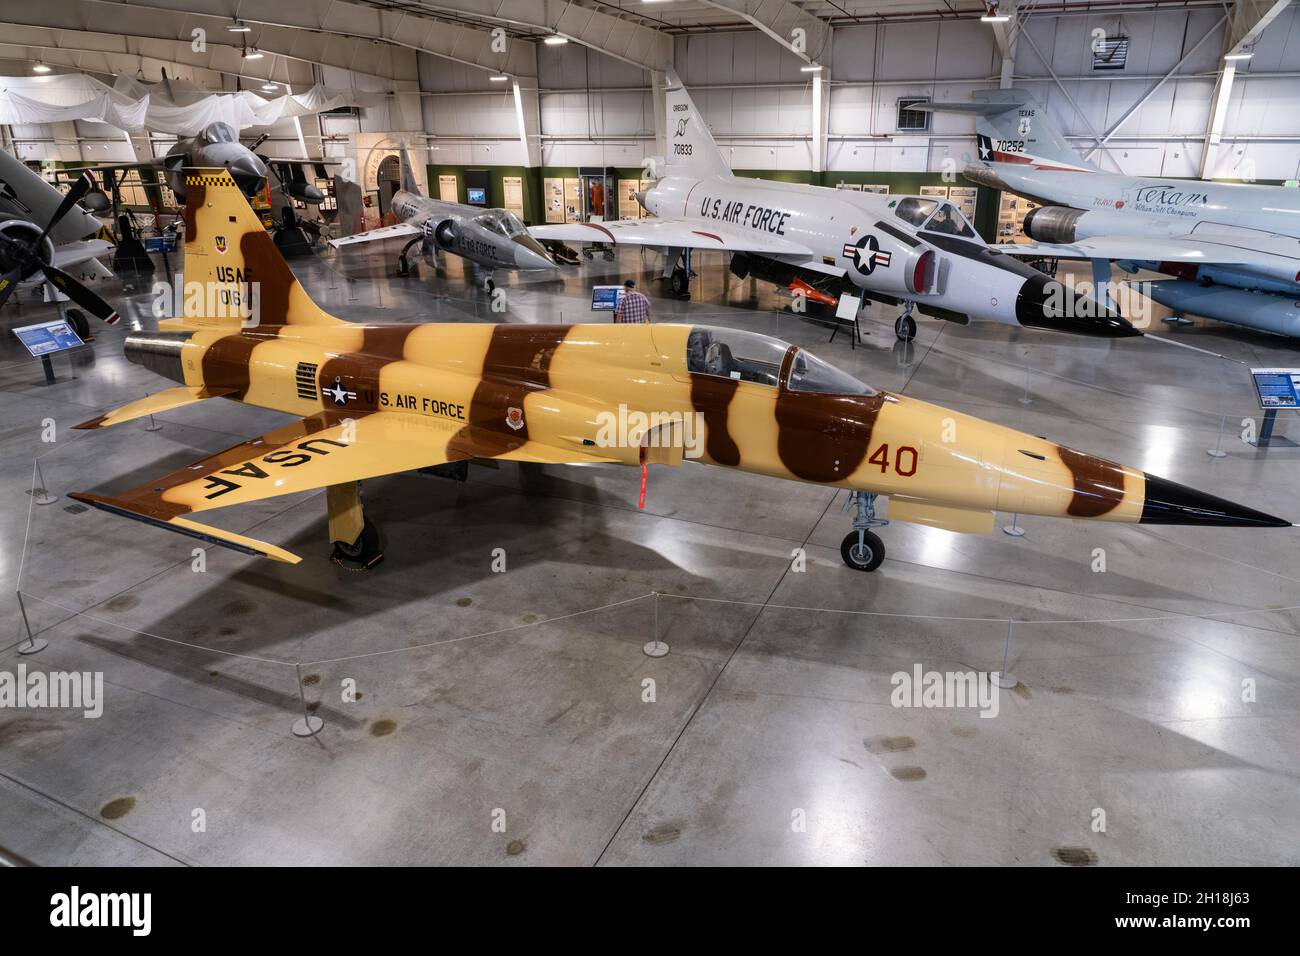 A Northrop F-5E Tiger II light fighter aircraft in the Hill Aerospace Museum in Utah.  Behind are an F-102 Delta Dagger and an F-104 Starfighter. Stock Photo